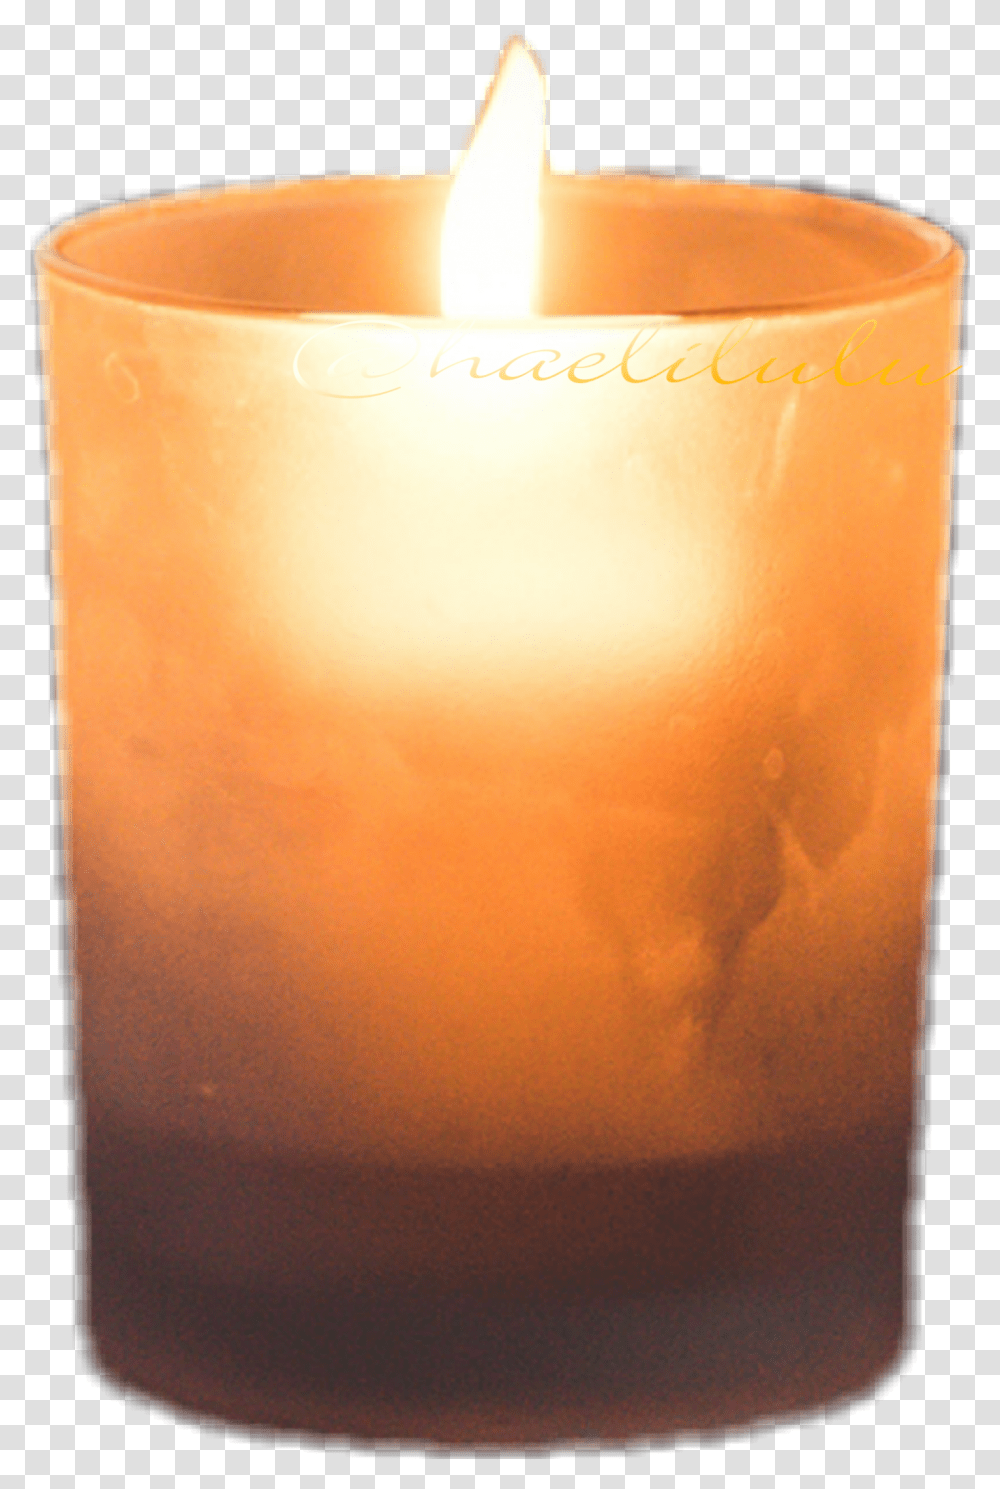 Colormehappy Light Candle Flame Candleflame Flicker Fli Candle, Lamp, Fire Transparent Png